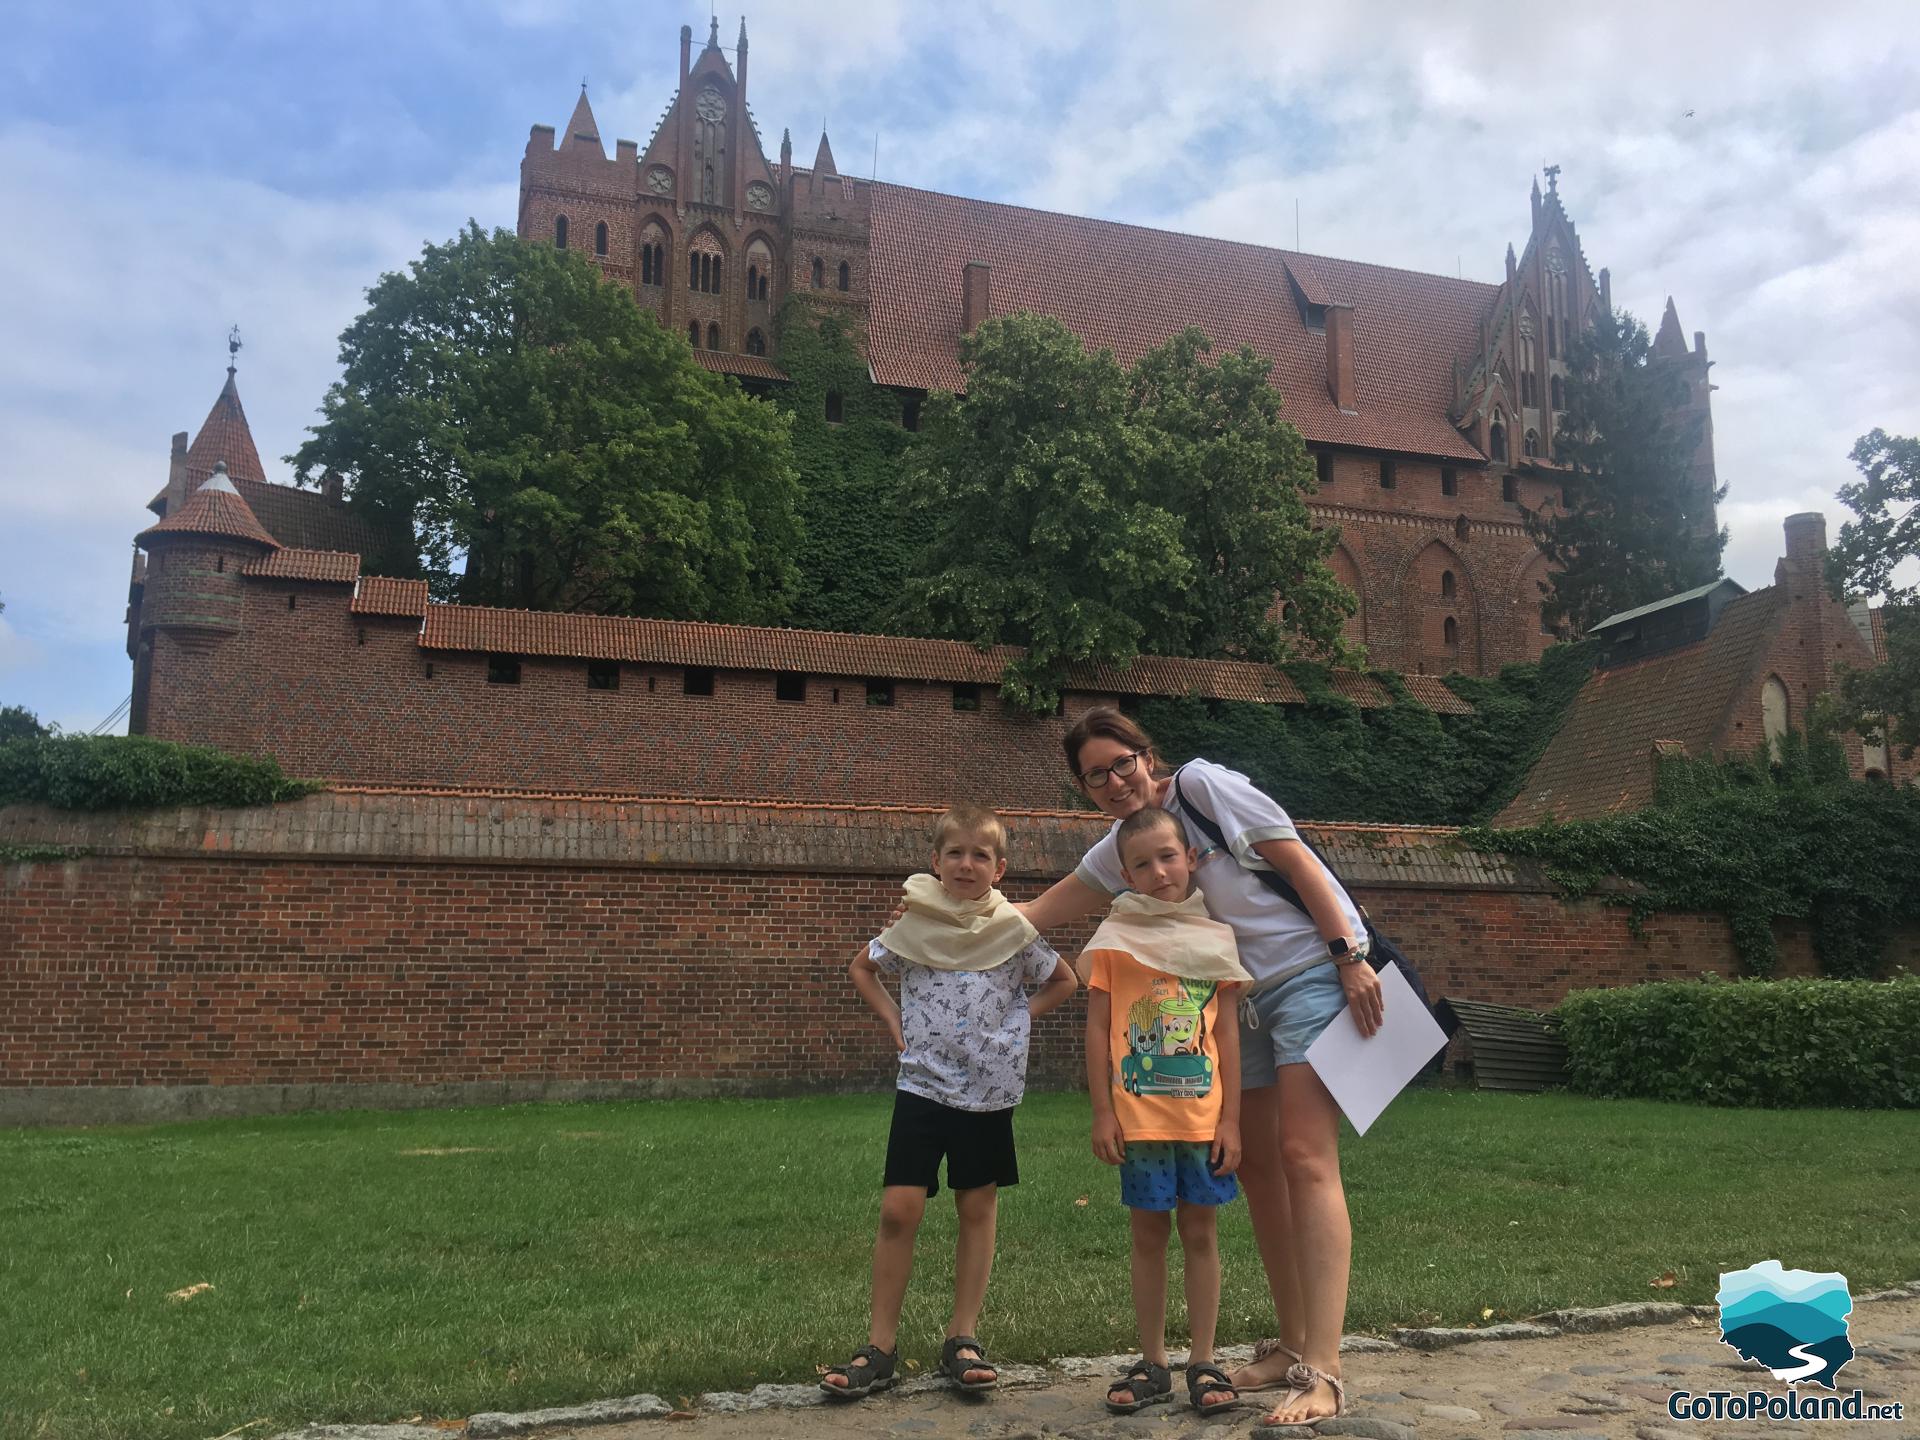 a woman and two boys are standing in front of the brick castle